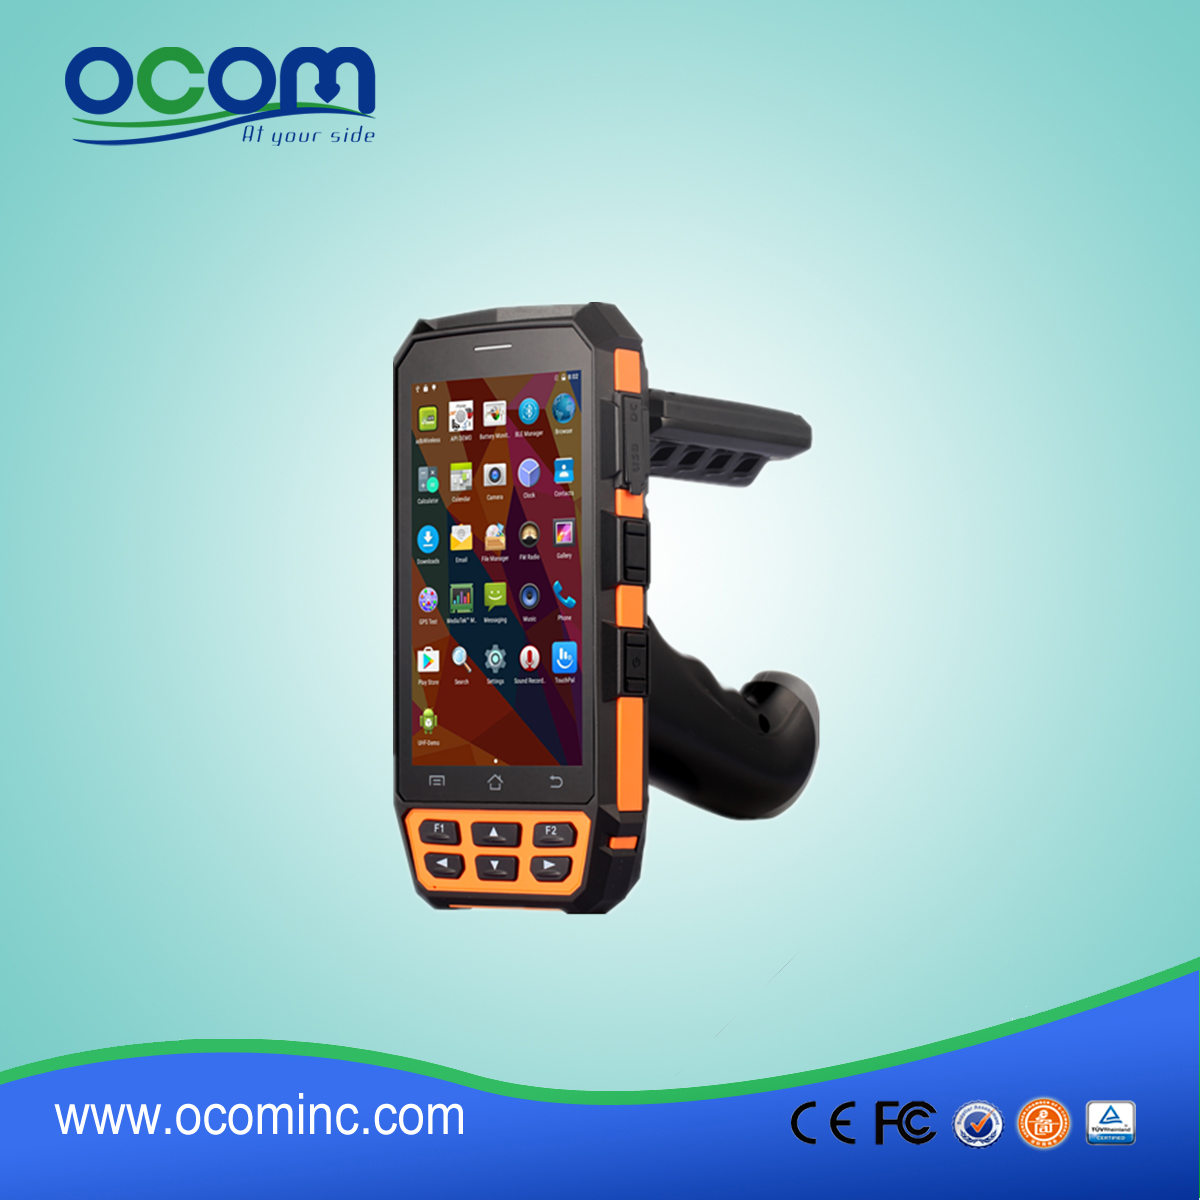 OCBS-D5000 Industrial Barcode Scanner Android PDA with Fingerprint Reader and Charging Cradle